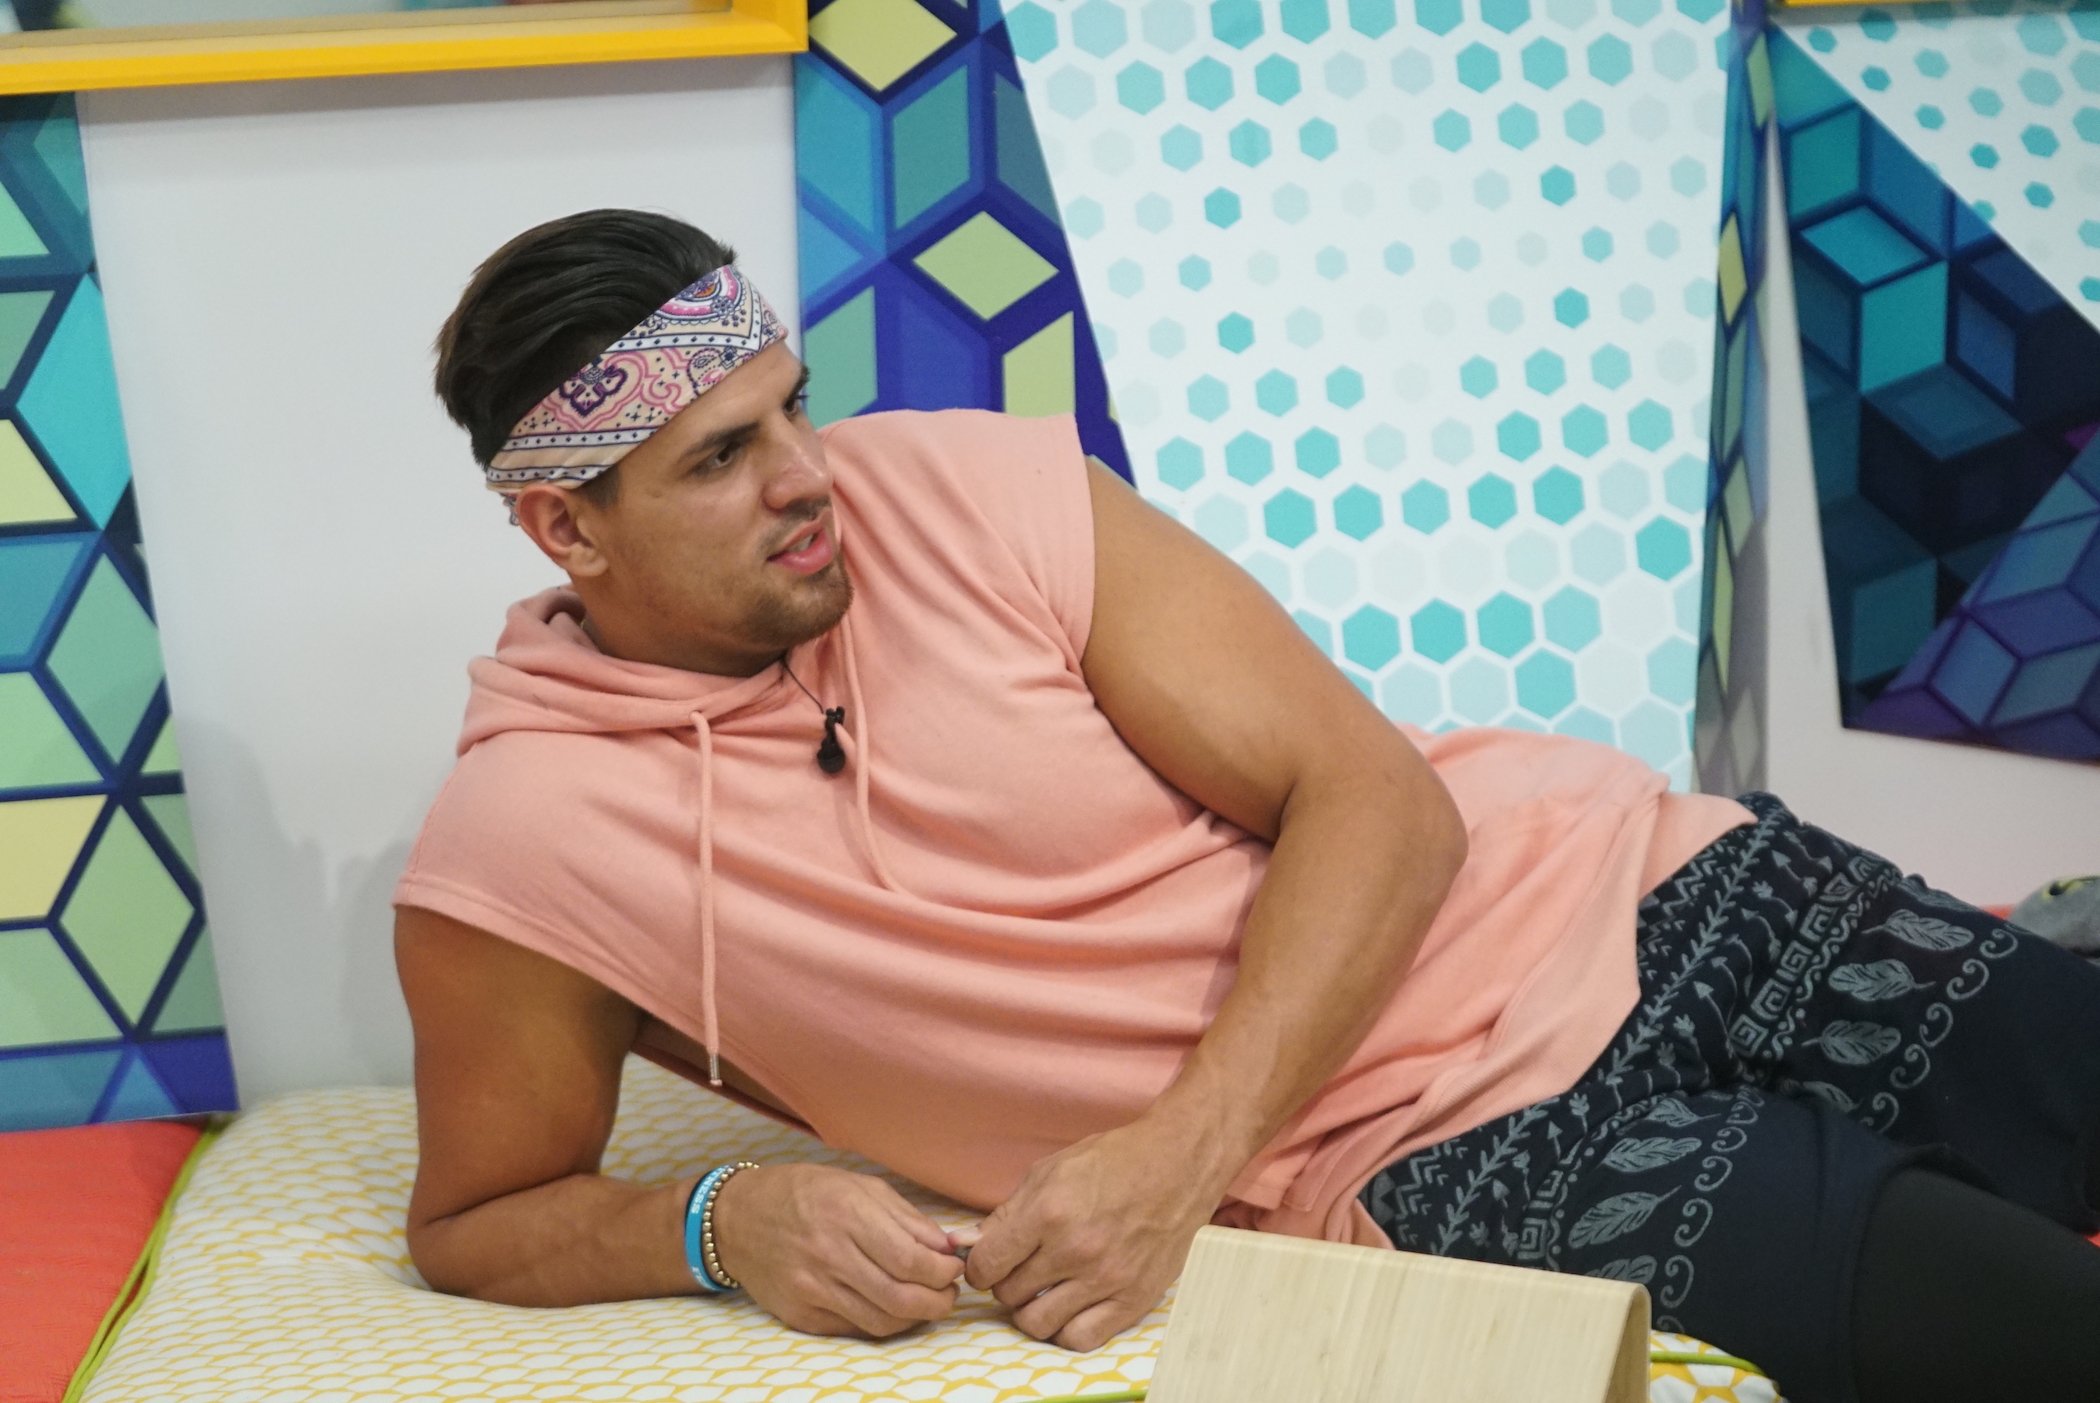 Fessy Shafaat from MTV's 'The Challenge' lounging in the 'Big Brother' house